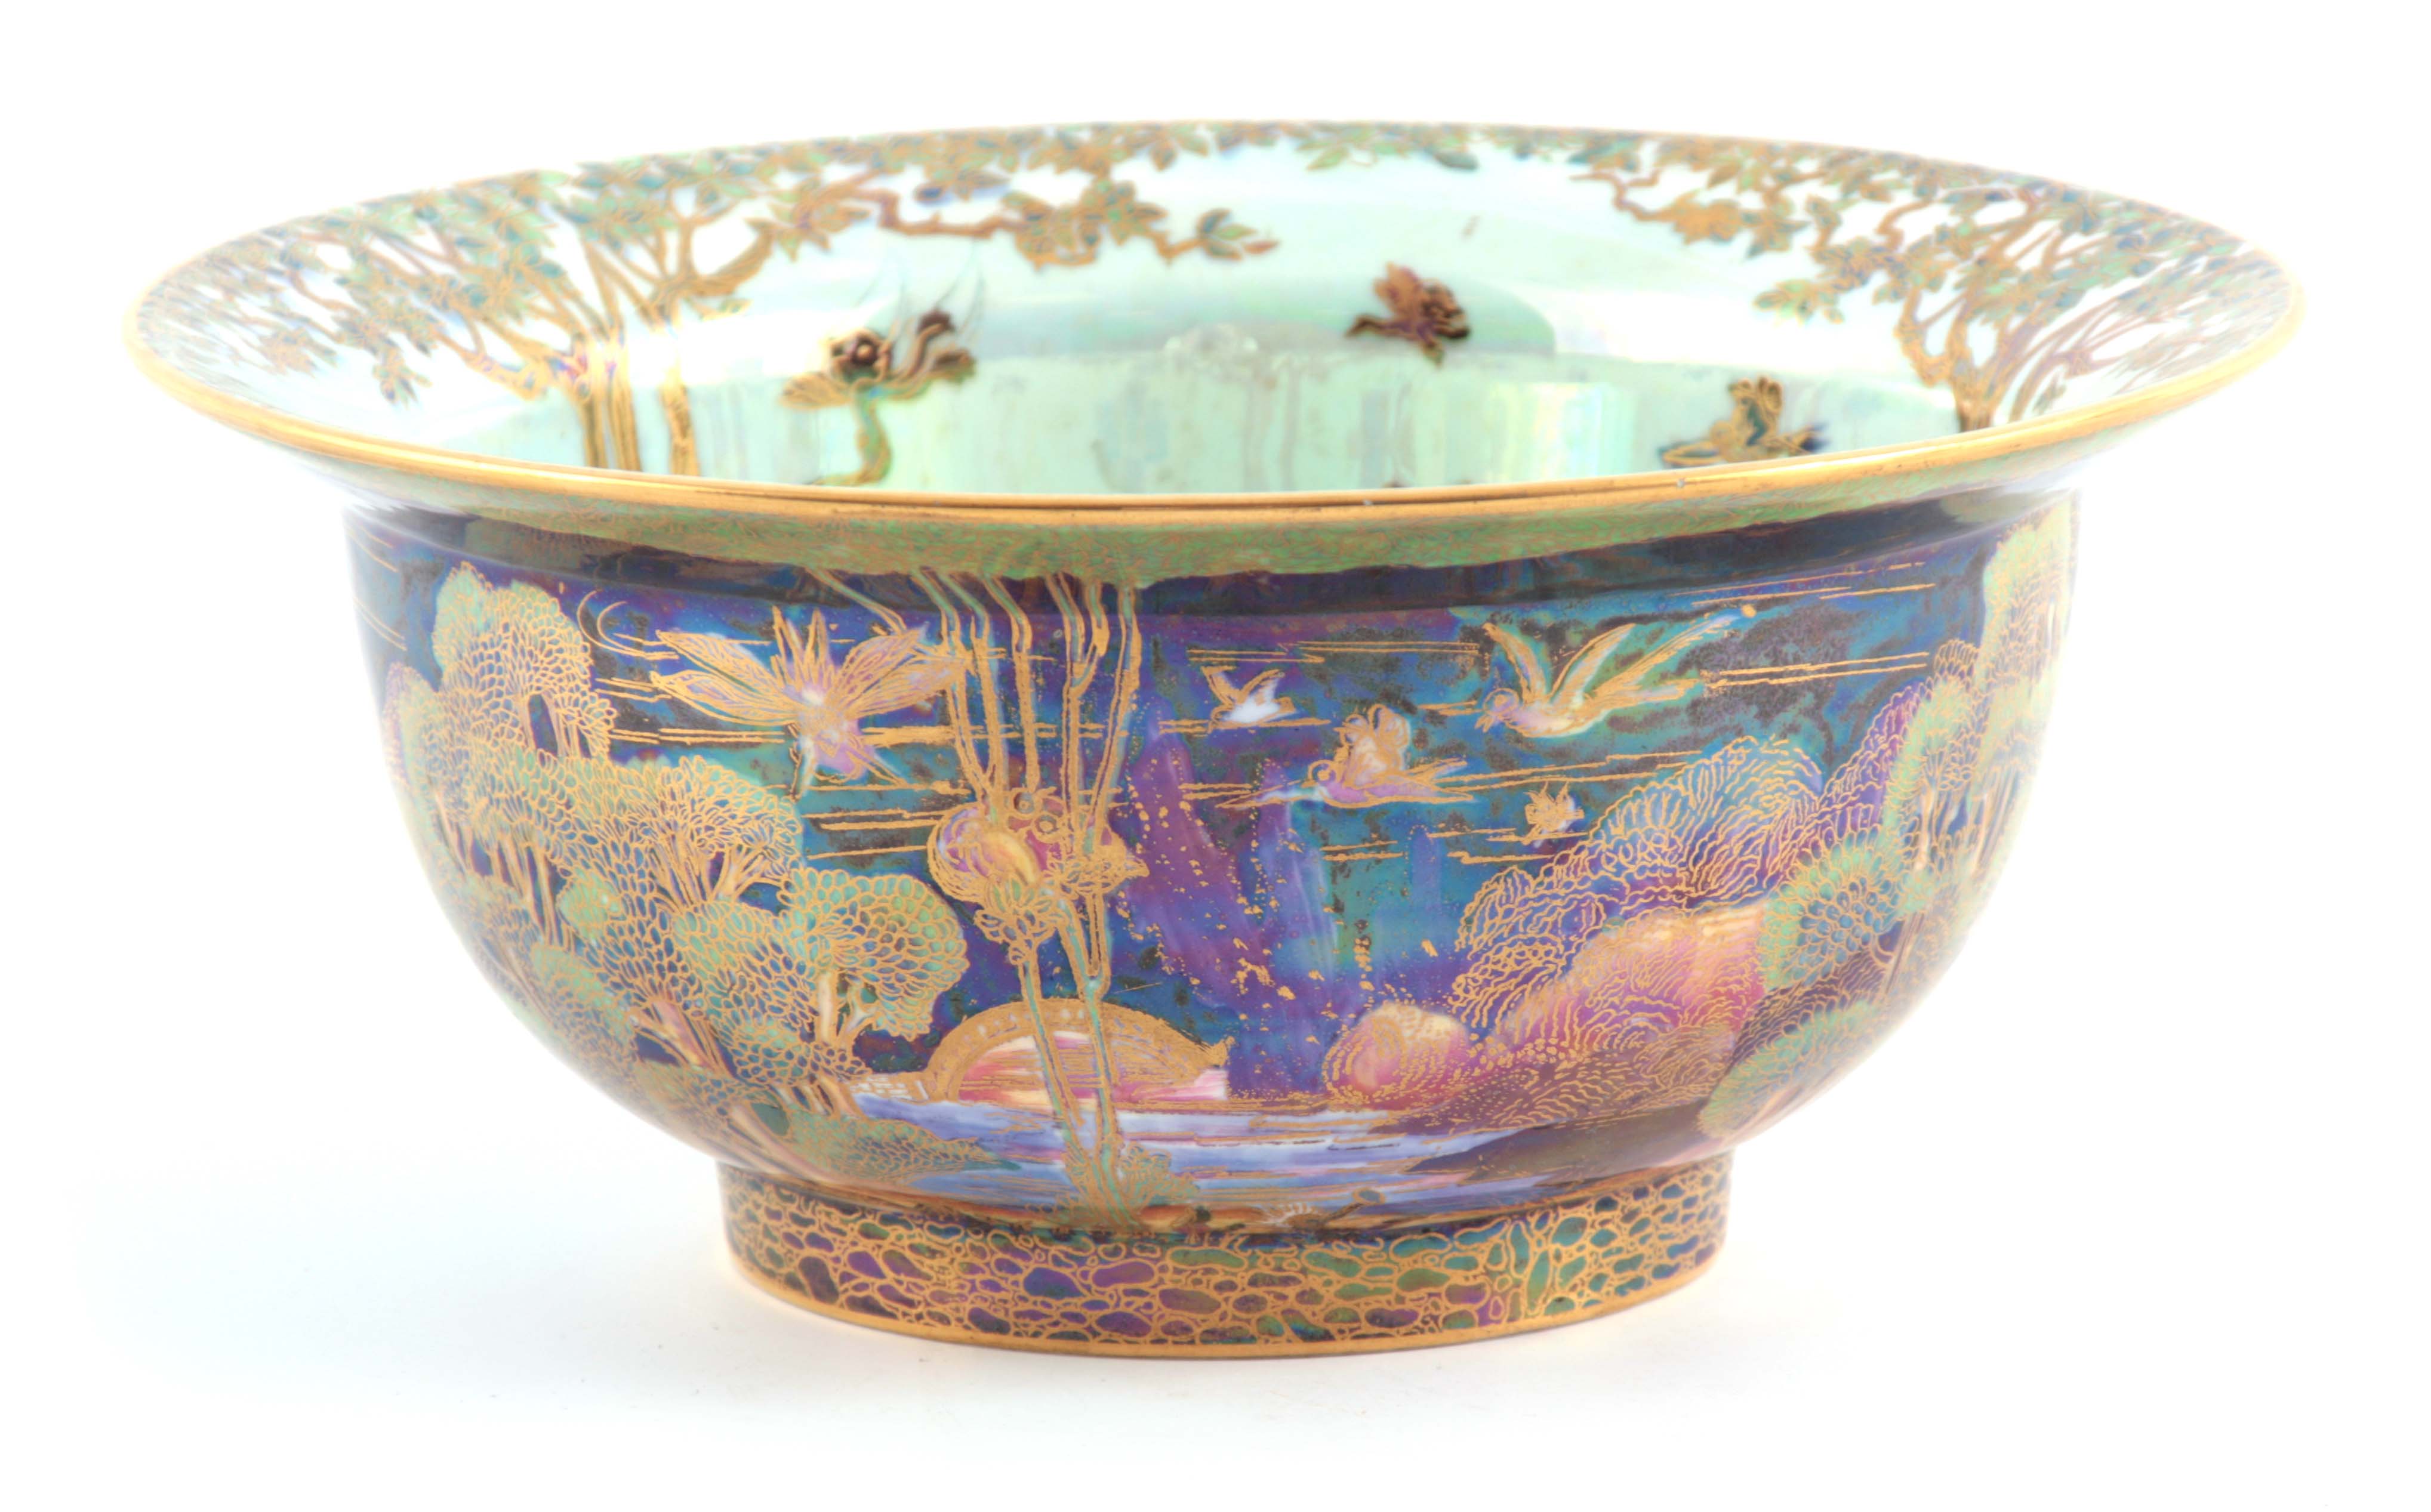 A FINE WEDGWOOD FAIRYLAND LUSTRE FOOTED BOWL WITH EVERTED RIM AFTER DESIGNS BY DAISY MAKEIG JONES